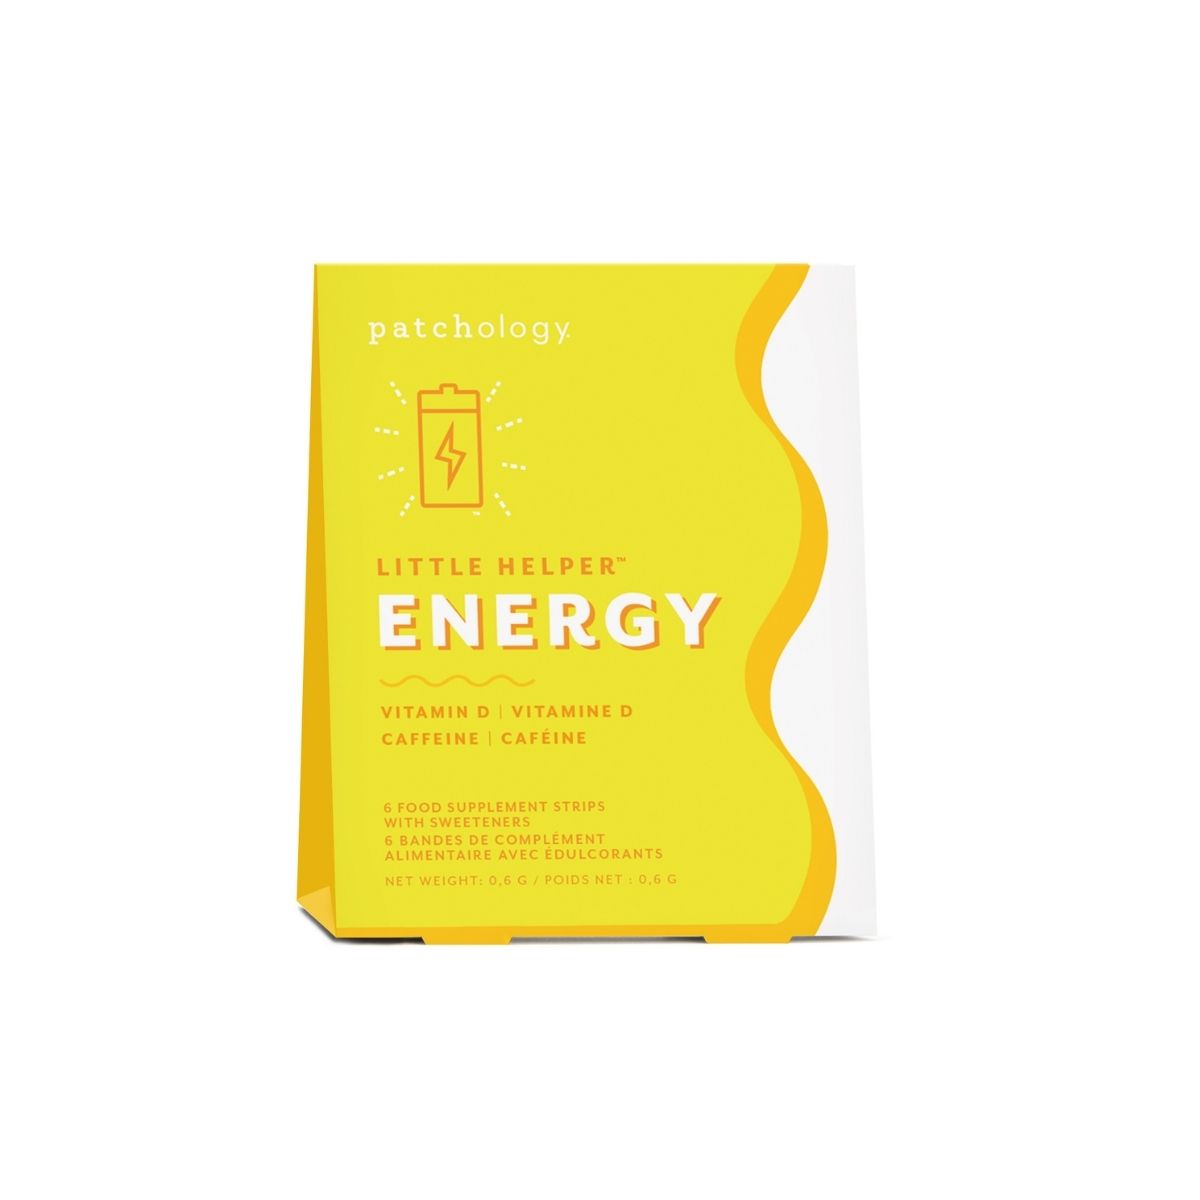 Patchology Energy Supplements 6-Pack.